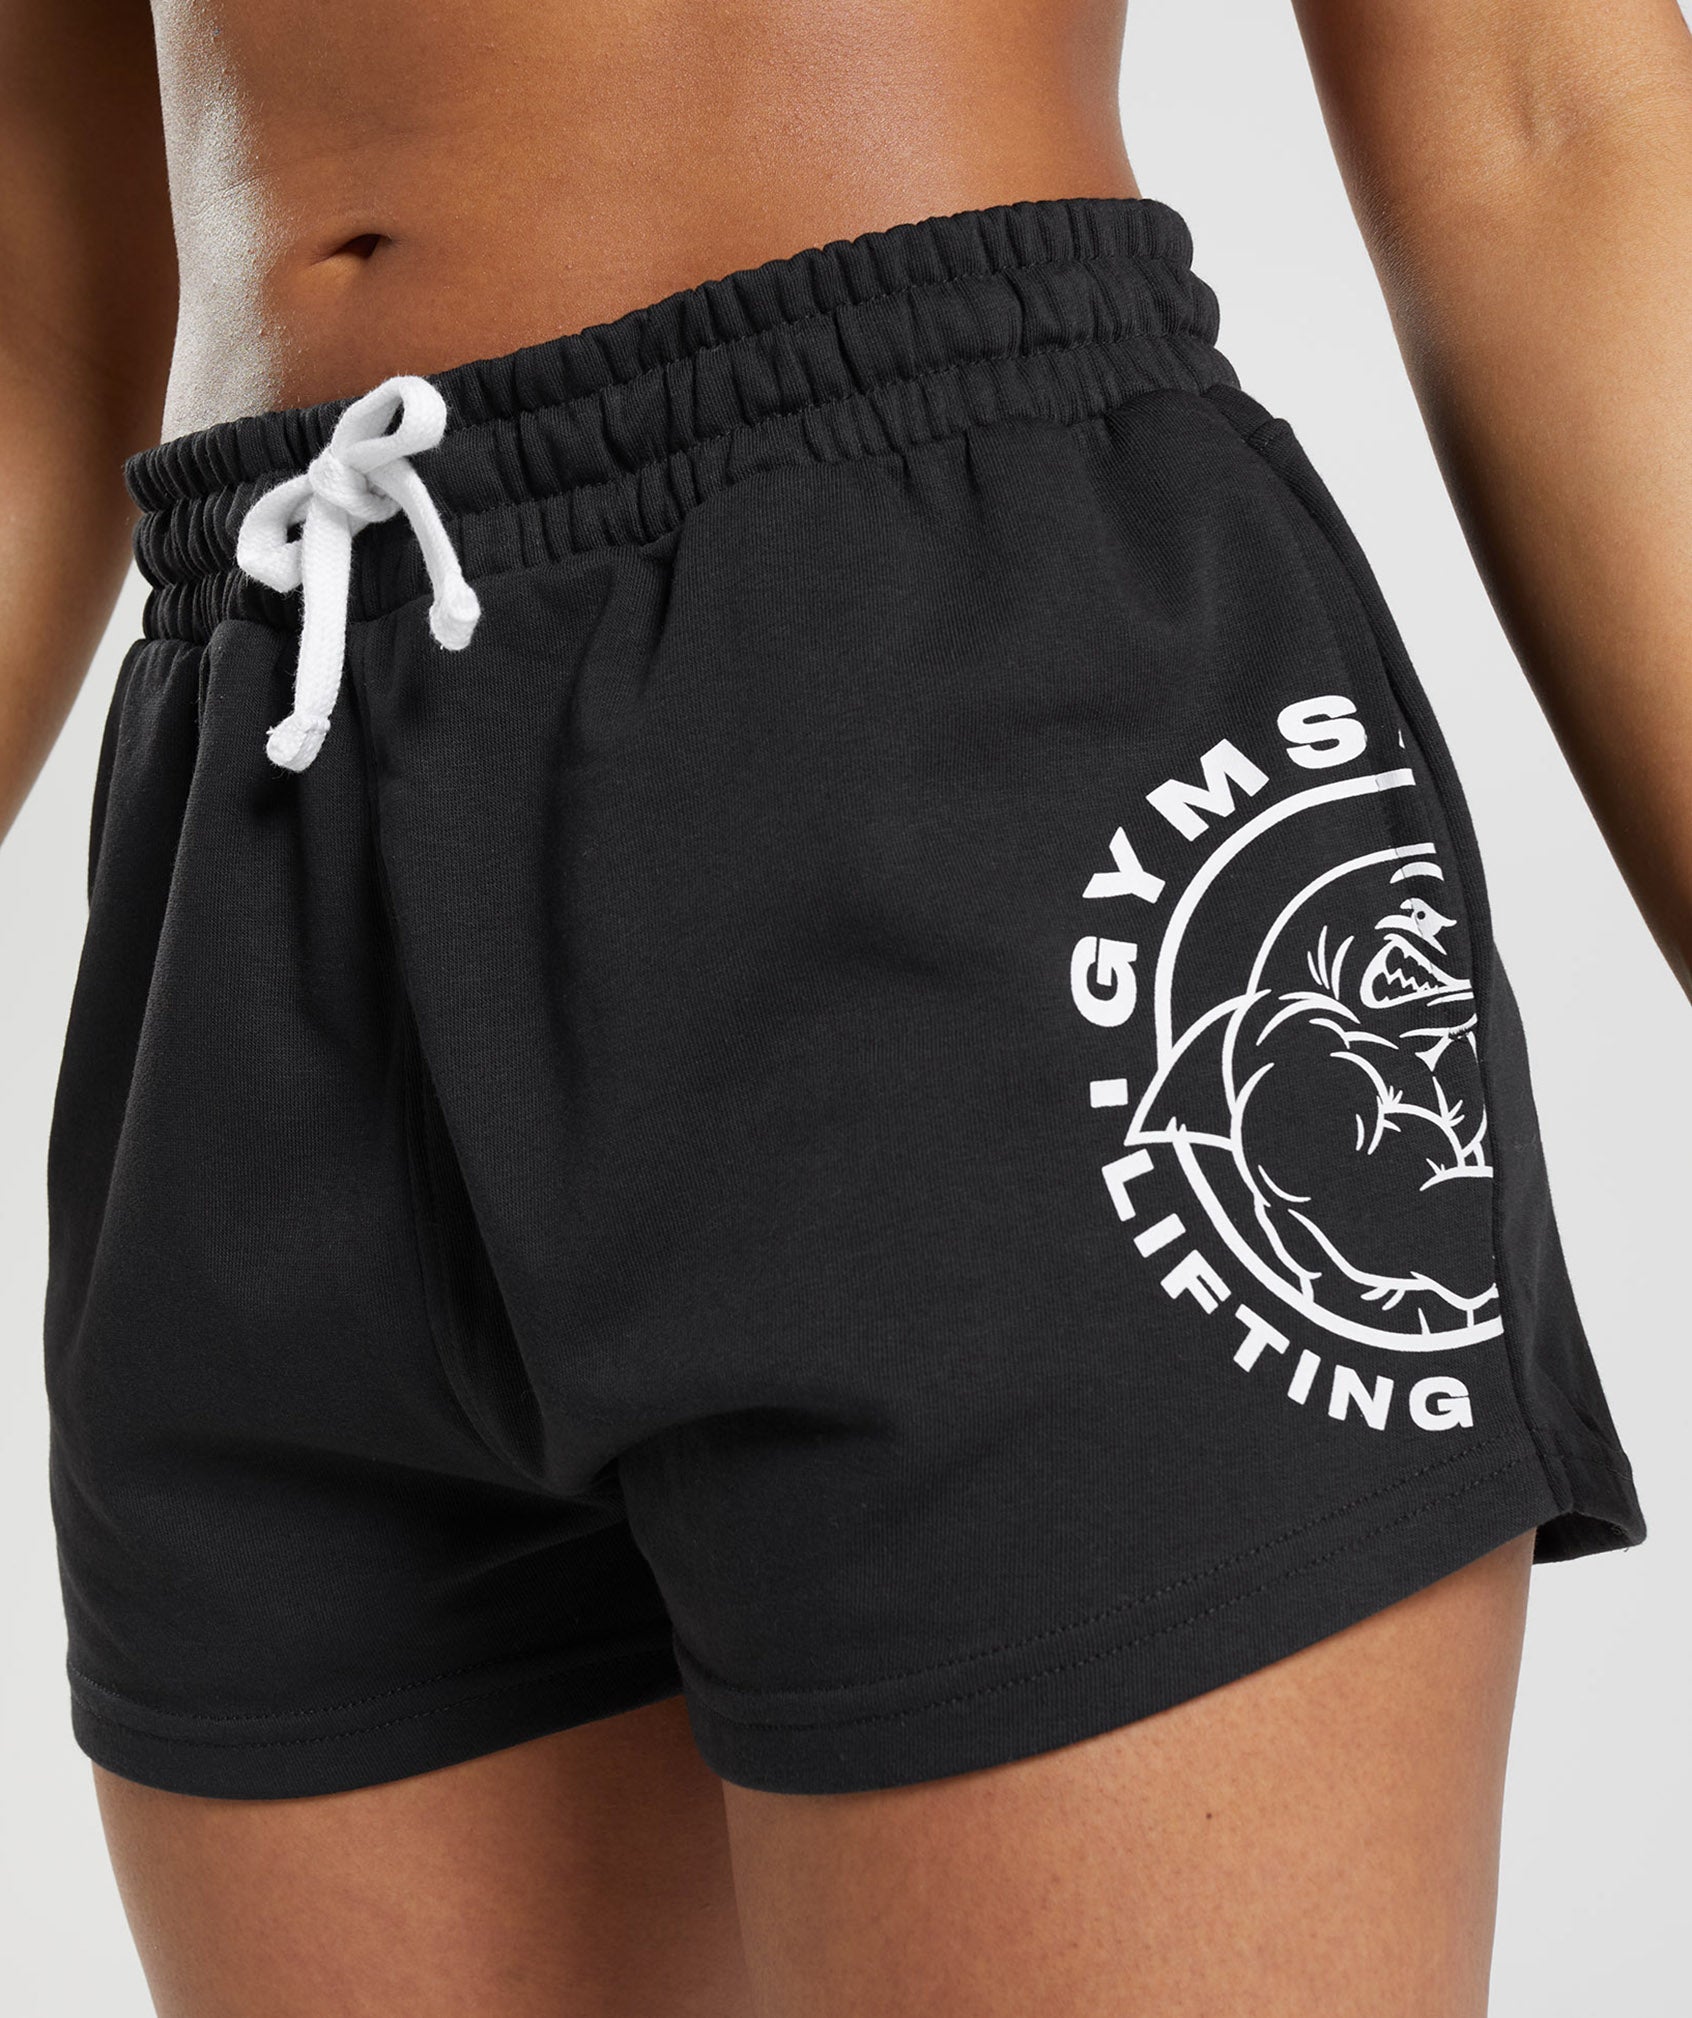 Legacy Shorts in Black - view 3